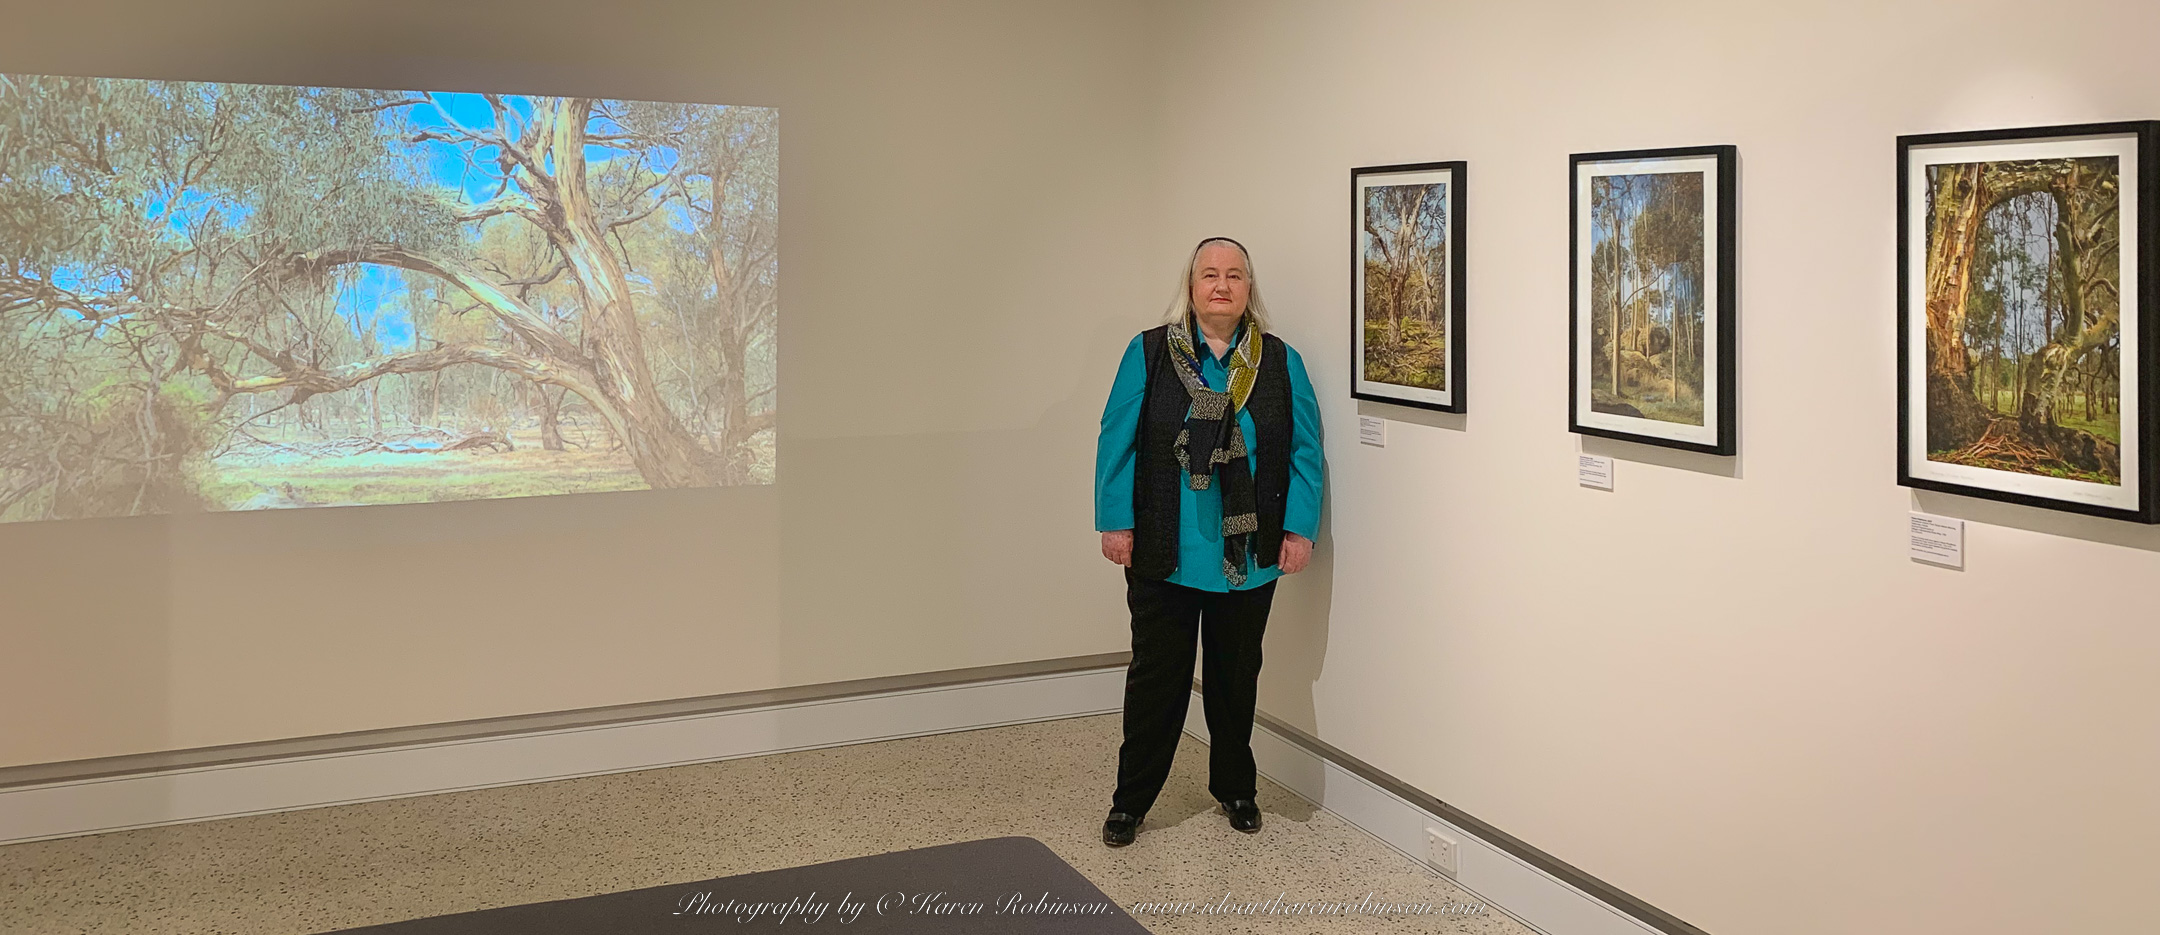 Photography 2022 – Solo Exhibition: “Promoting Launch –
Photographic Portraits of Nature by Karen Robinson”